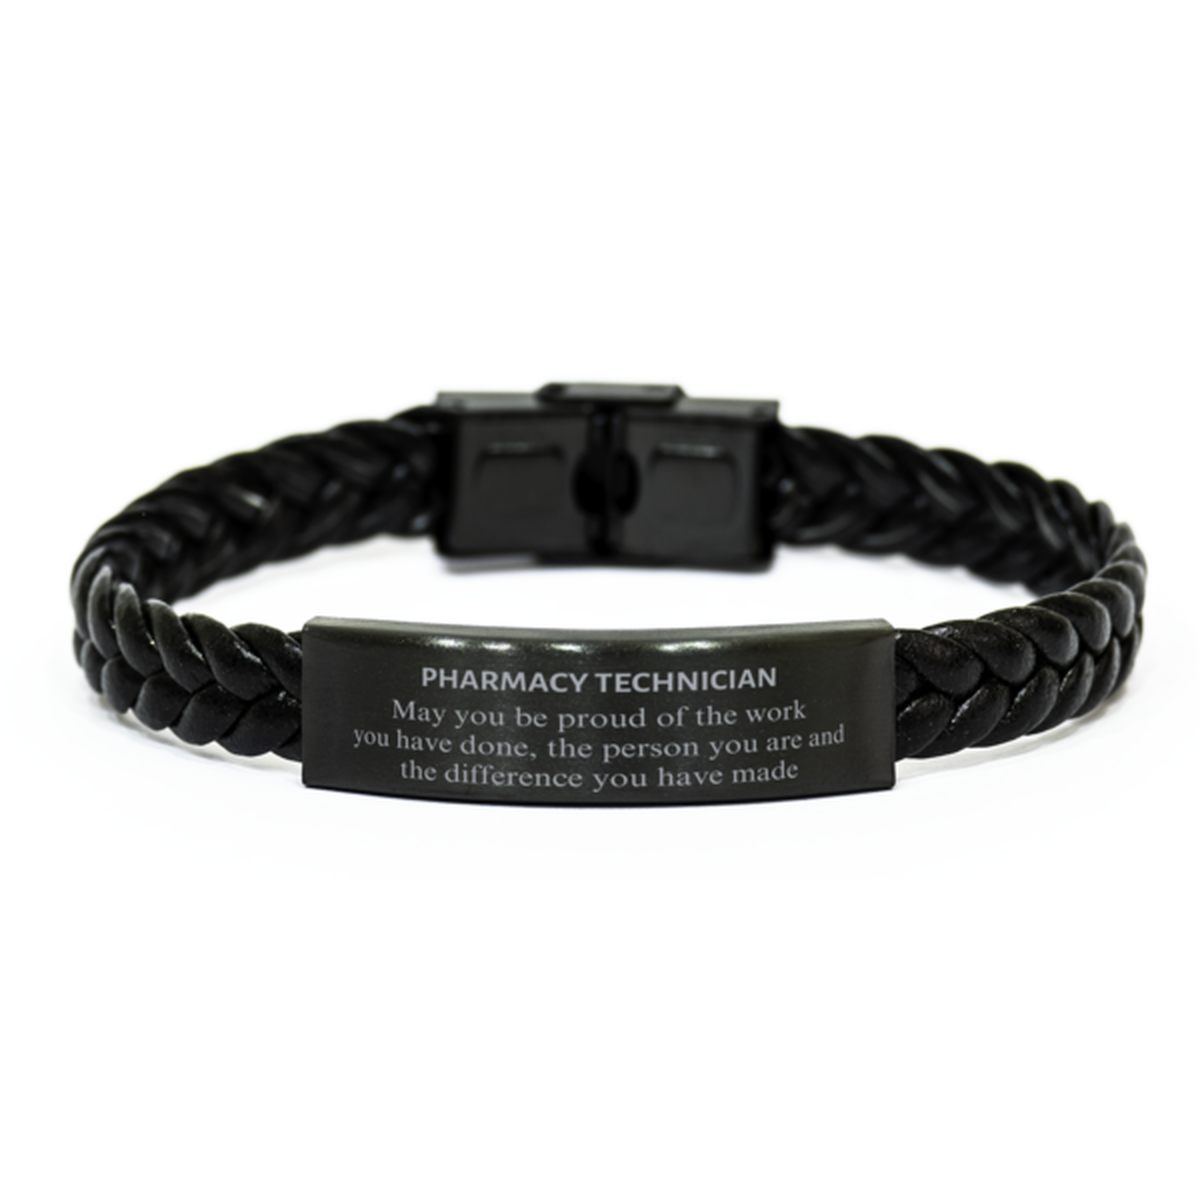 Pharmacy Technician May you be proud of the work you have done, Retirement Pharmacy Technician Braided Leather Bracelet for Colleague Appreciation Gifts Amazing for Pharmacy Technician